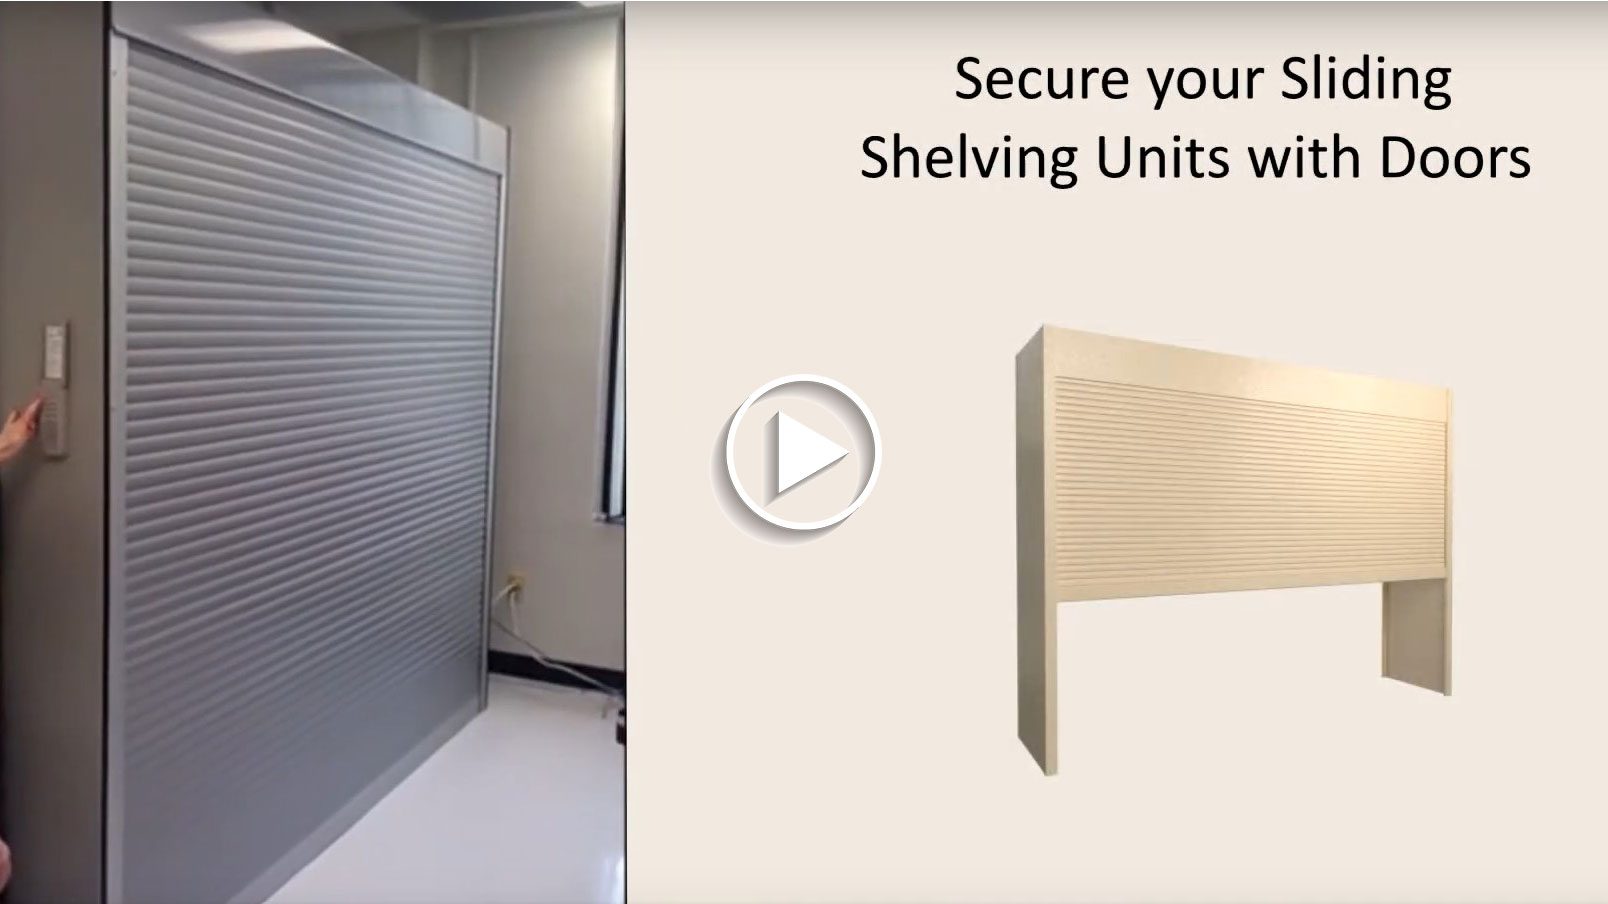 Rolling Shelving with Keypad Controls